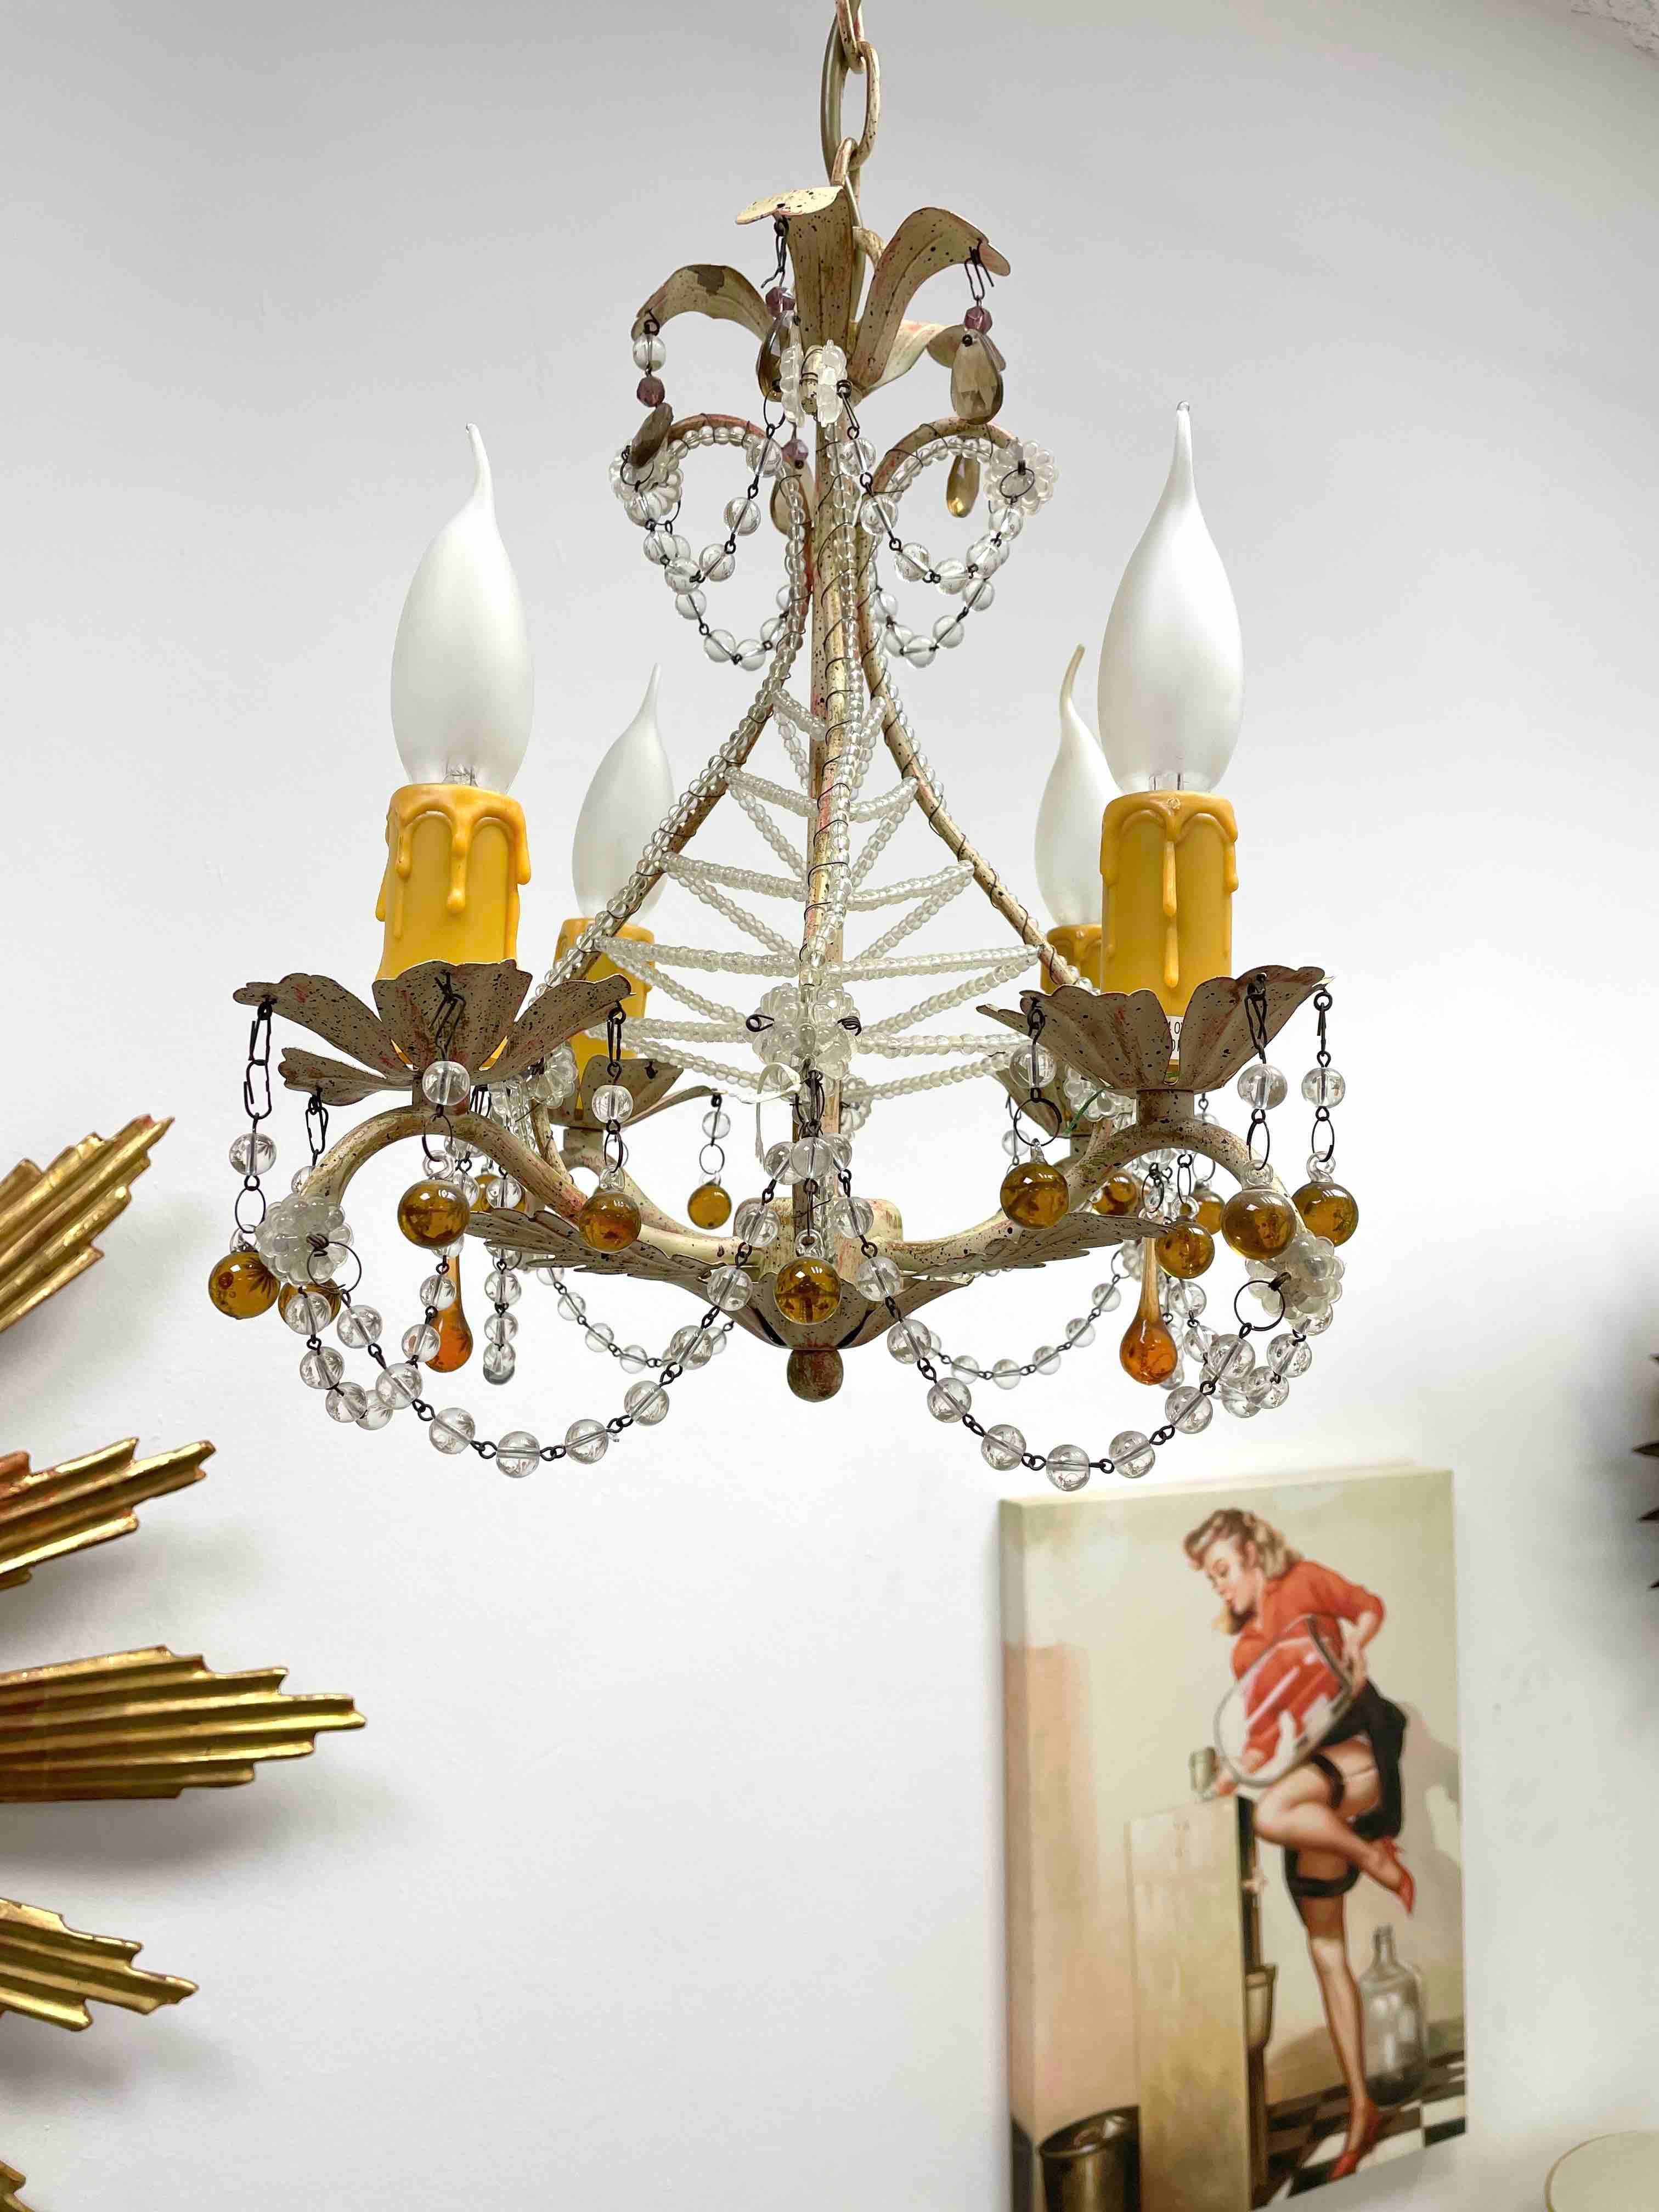 Petite Florentine style four-light chandelier. Functions as is with four E14 / 110 Volt light bulbs. Can take up to 40 Watts each bulb. Beautiful colored metal chandelier with lots fo crystal glass.
It gives the room a beautiful warm light and